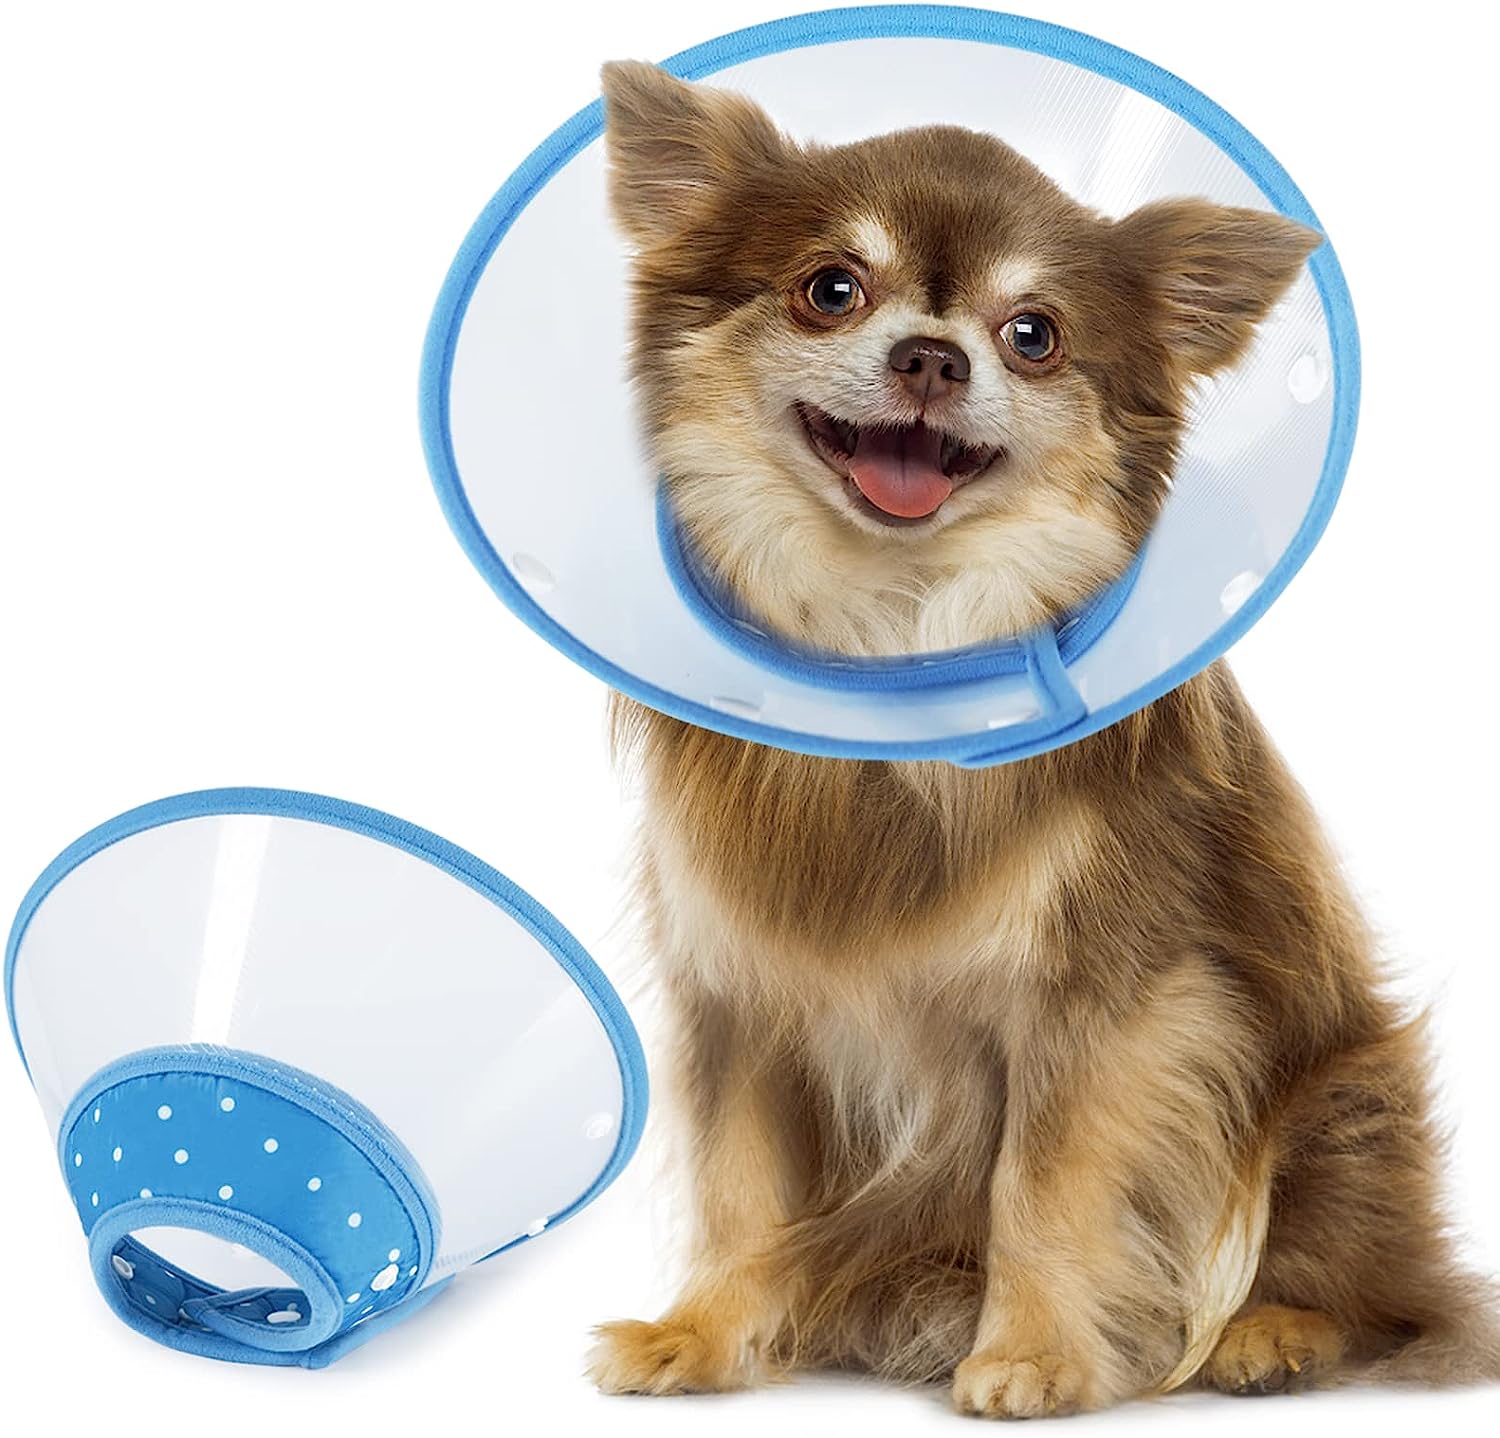 Vivifying Pet Cone for Small Dogs